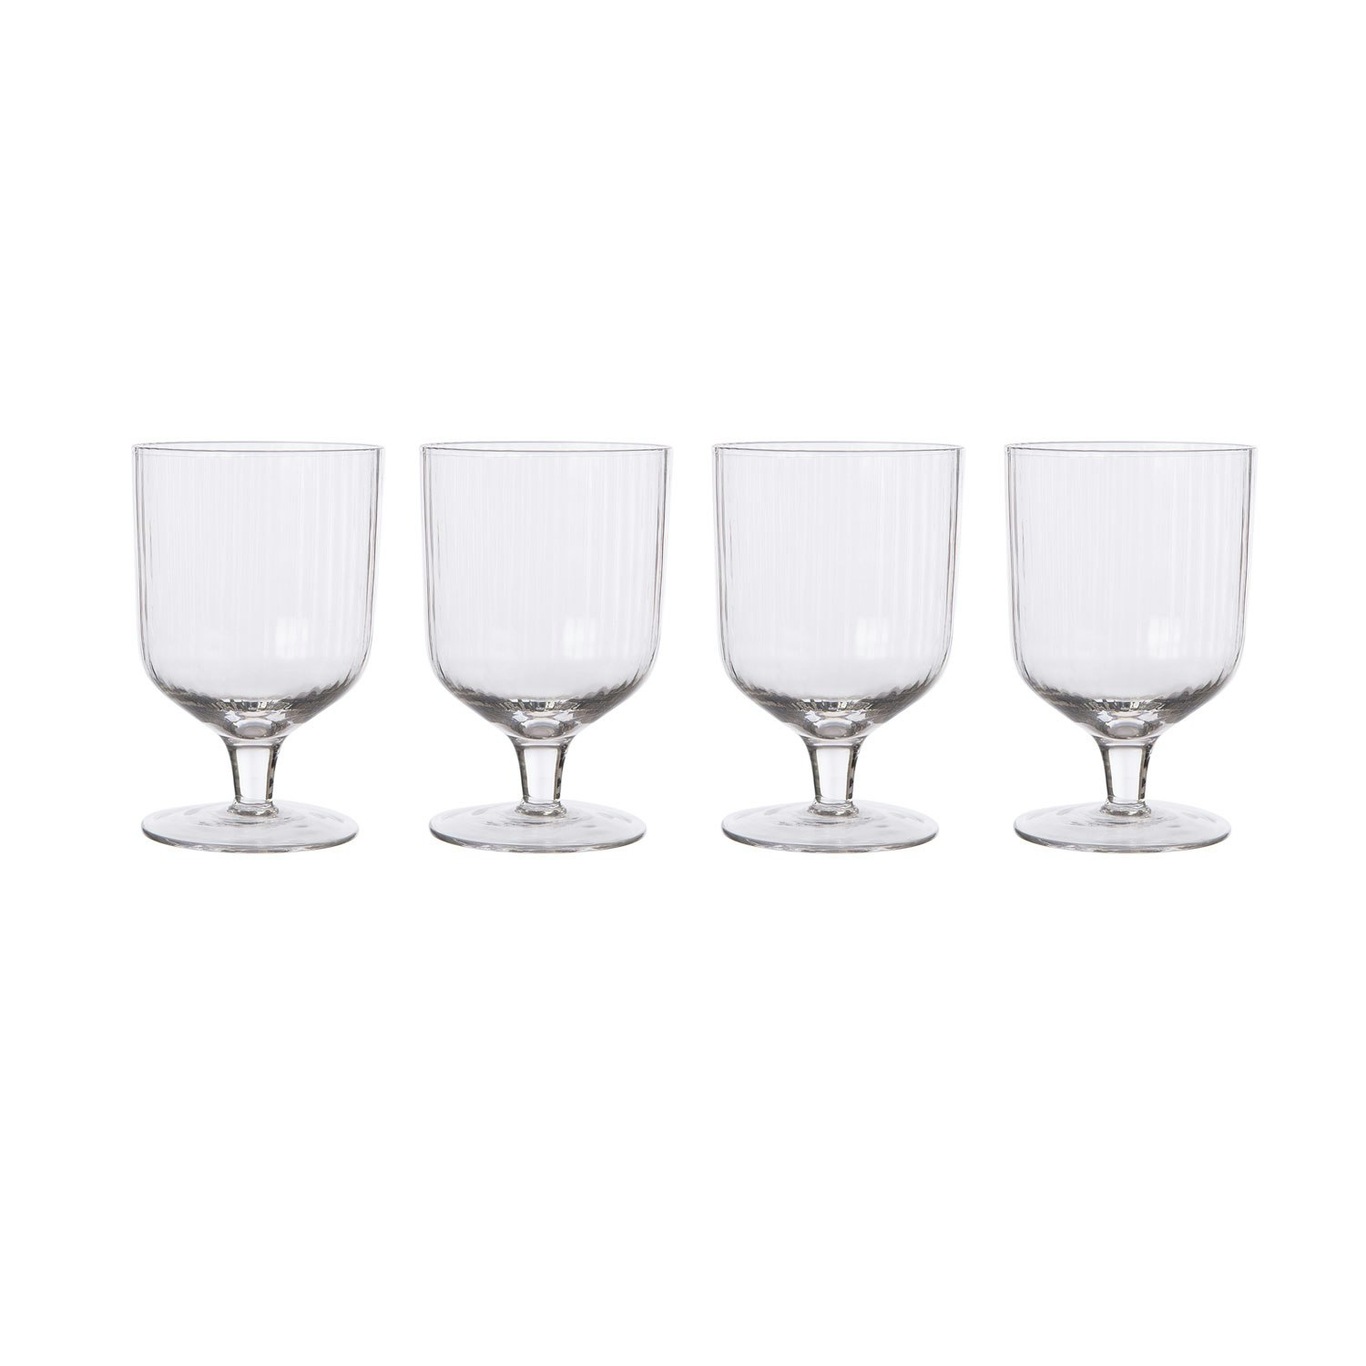 https://royaldesign.com/image/2/ernst-drinking-glasses-fluted-with-foot-4-pack-0?w=800&quality=80